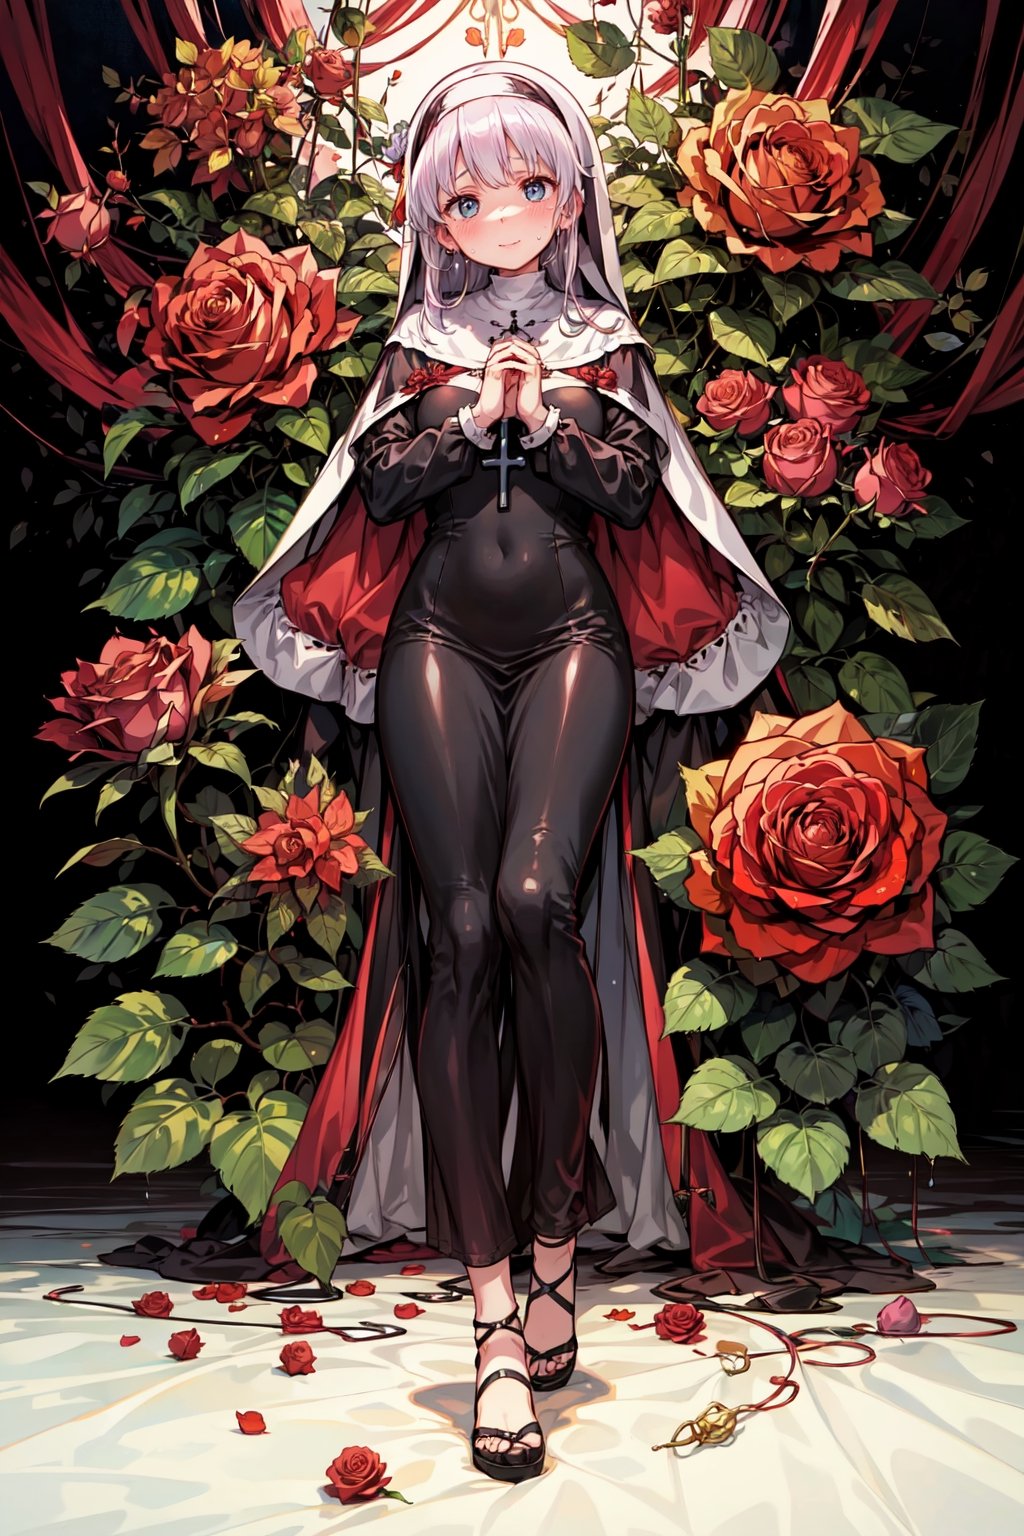 masterpiece, {{illustration}} 1 girl, full body, serene face, calm, black nun's dress, headband of red roses, poisonous roses, praying, inherited by thorny brambles, in front of rose bushes with red roses, scarlet dragon in the background in the middle of a forest. (sweaty:1.1),,